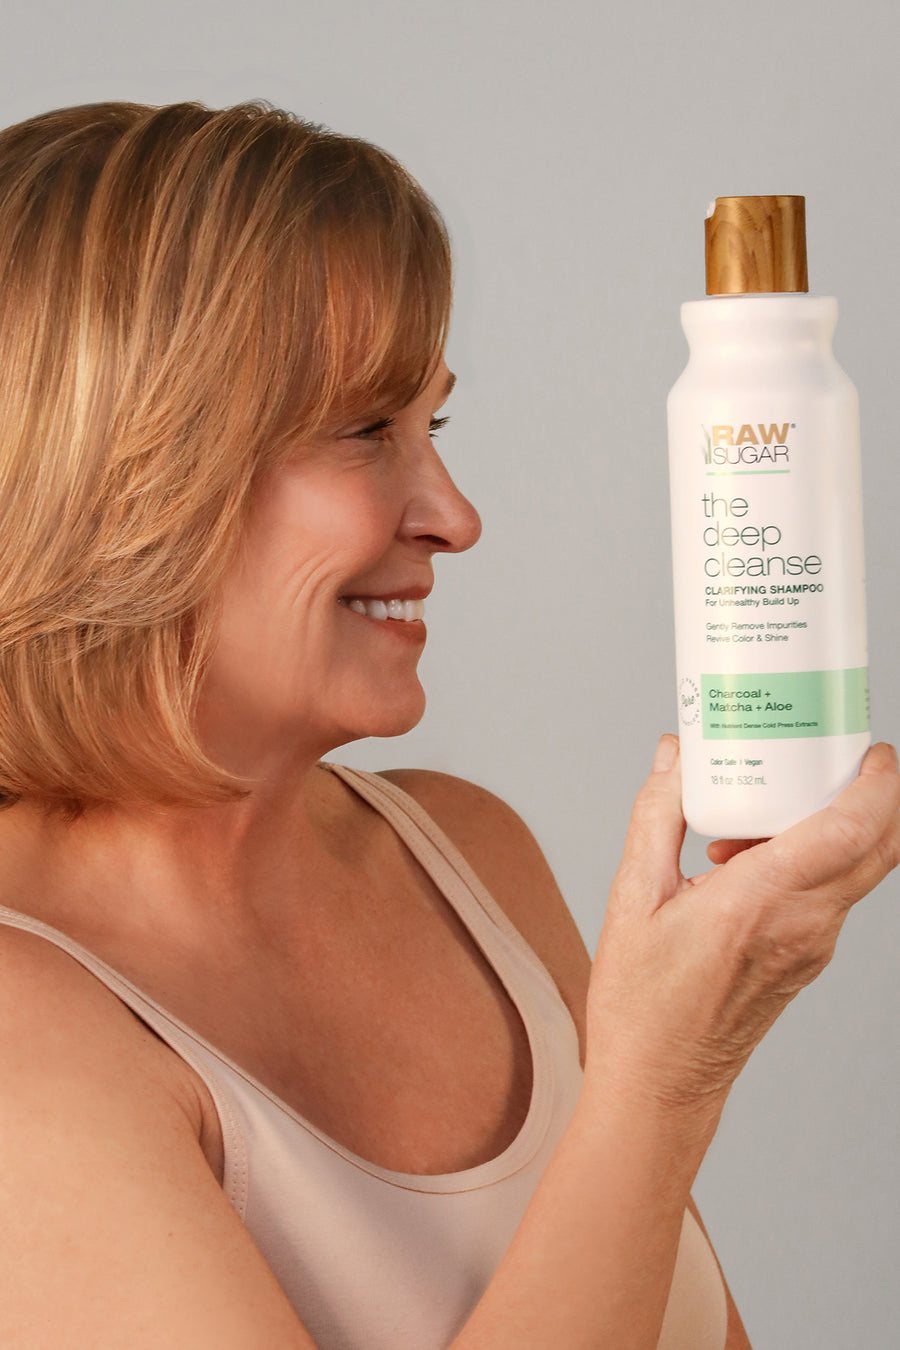 woman smiling holding deep cleanse shampoo